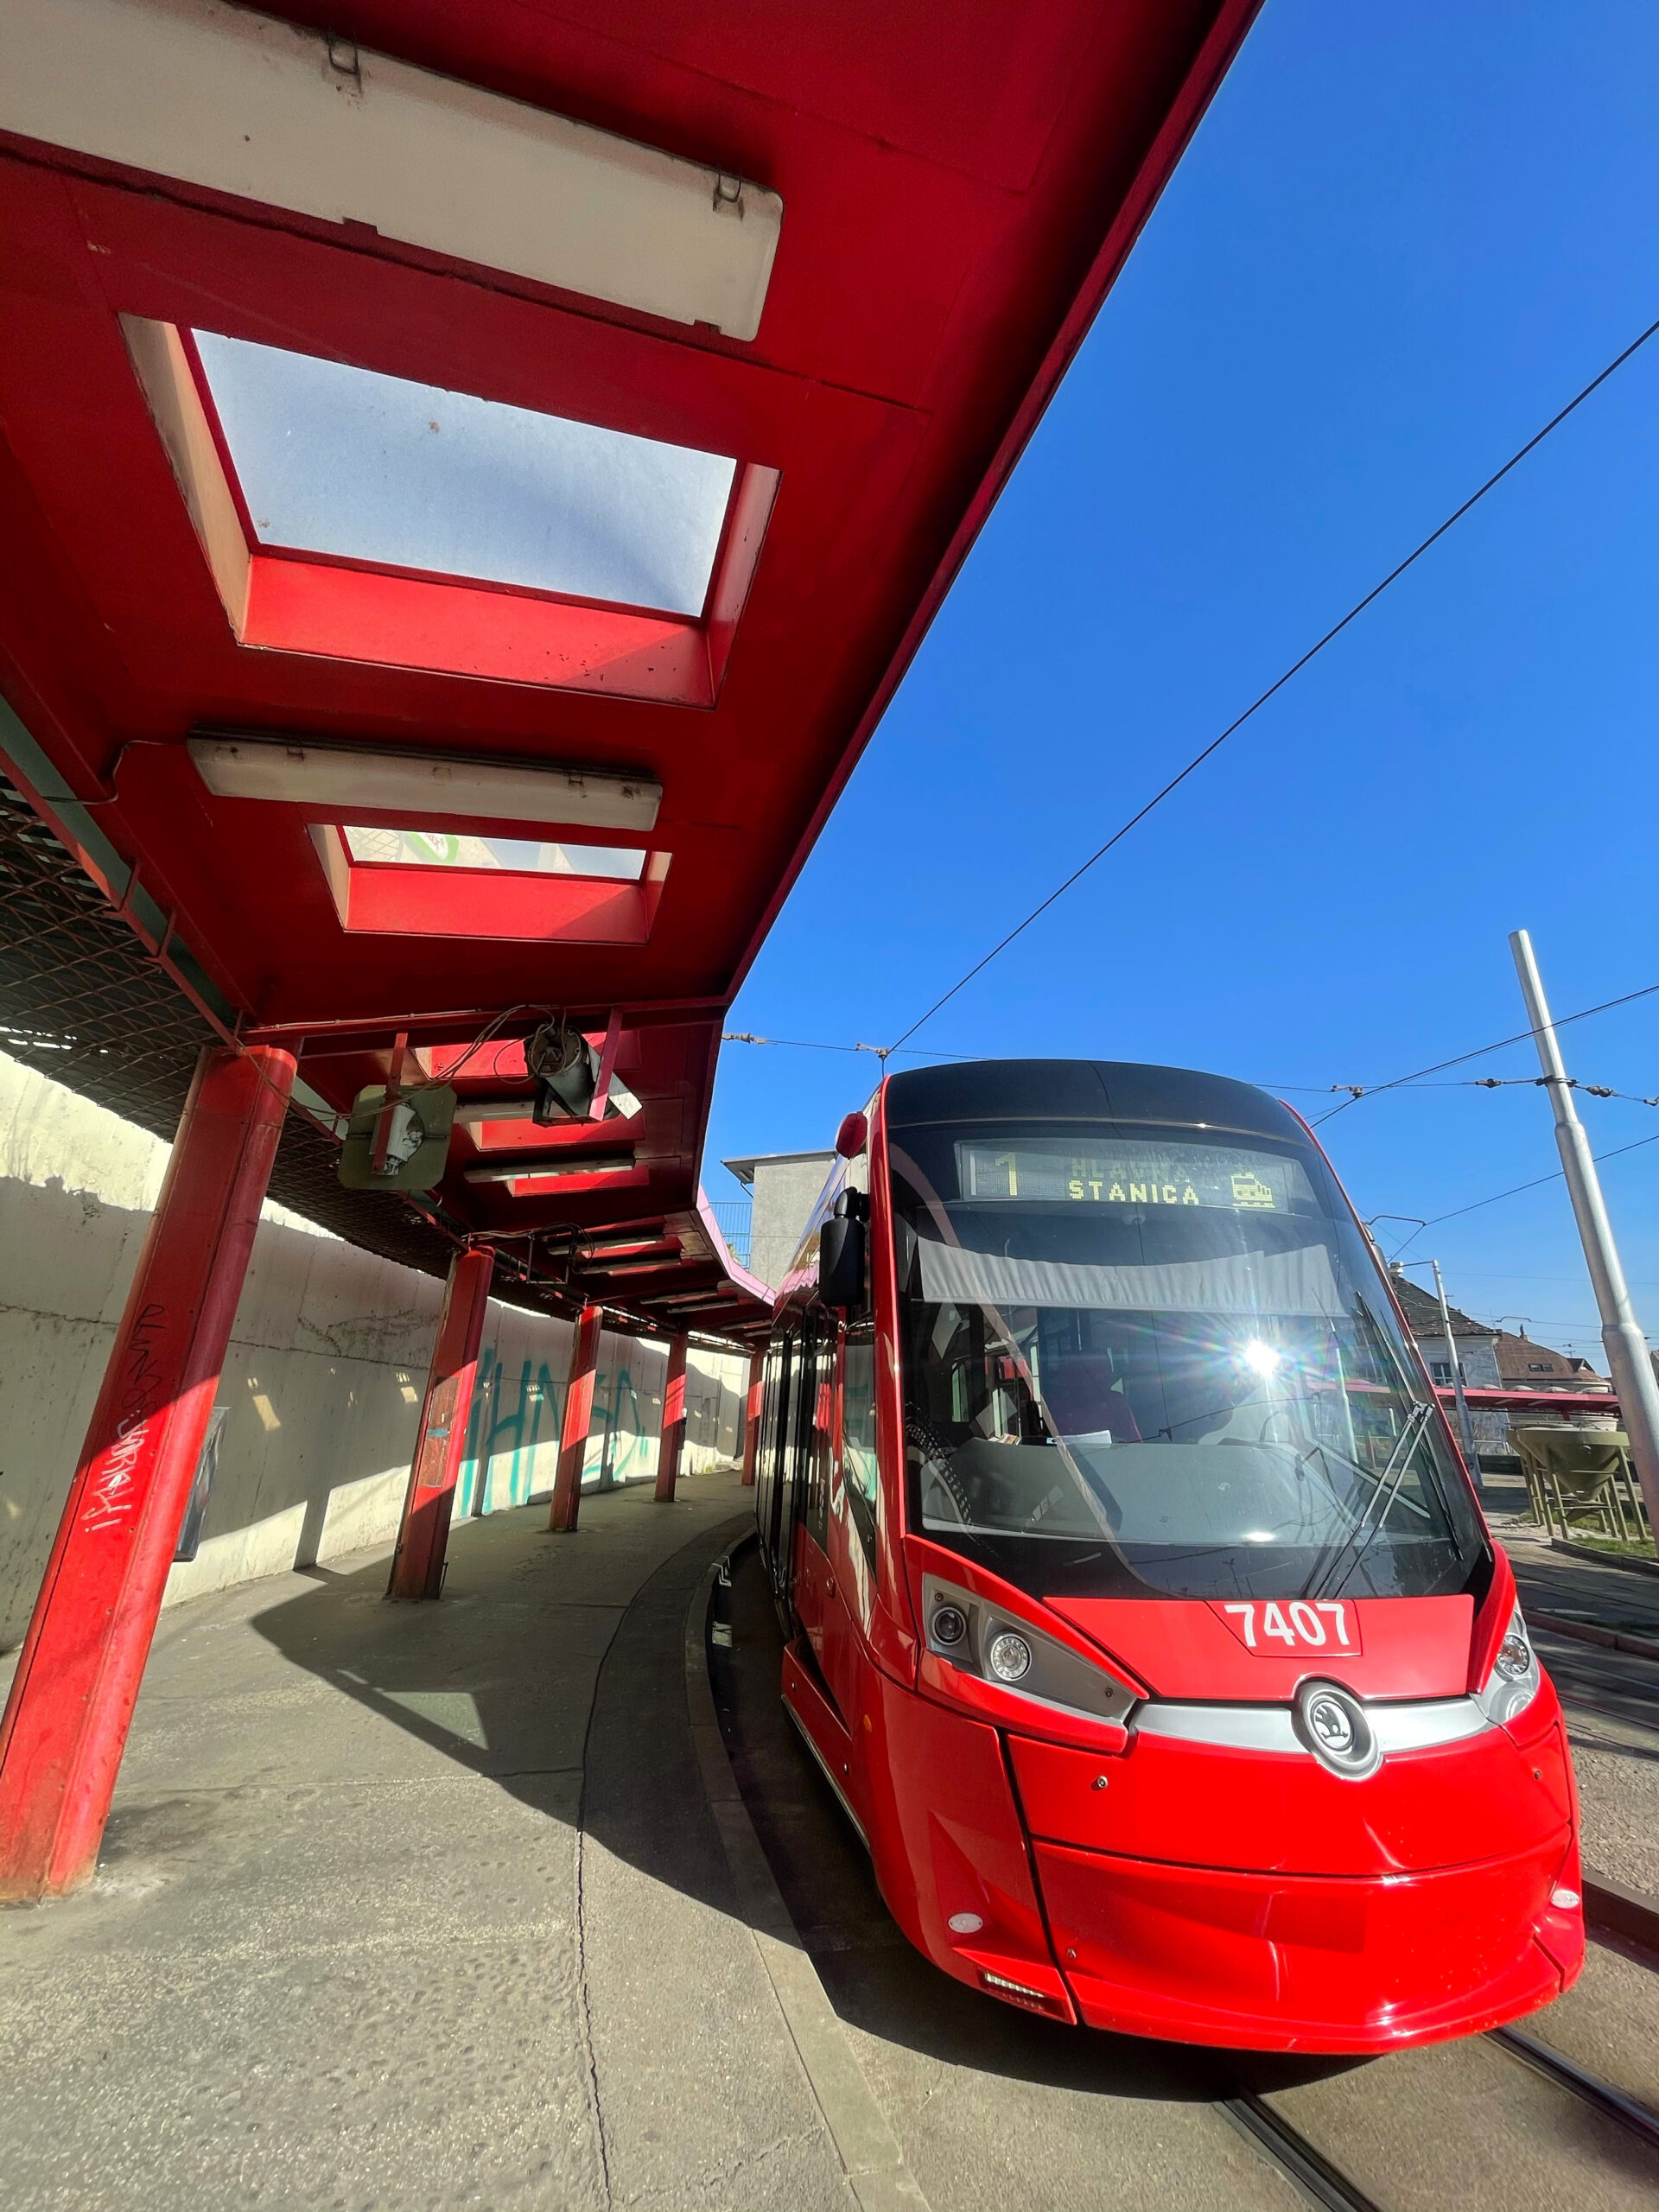 photo of a red tram at a tram station